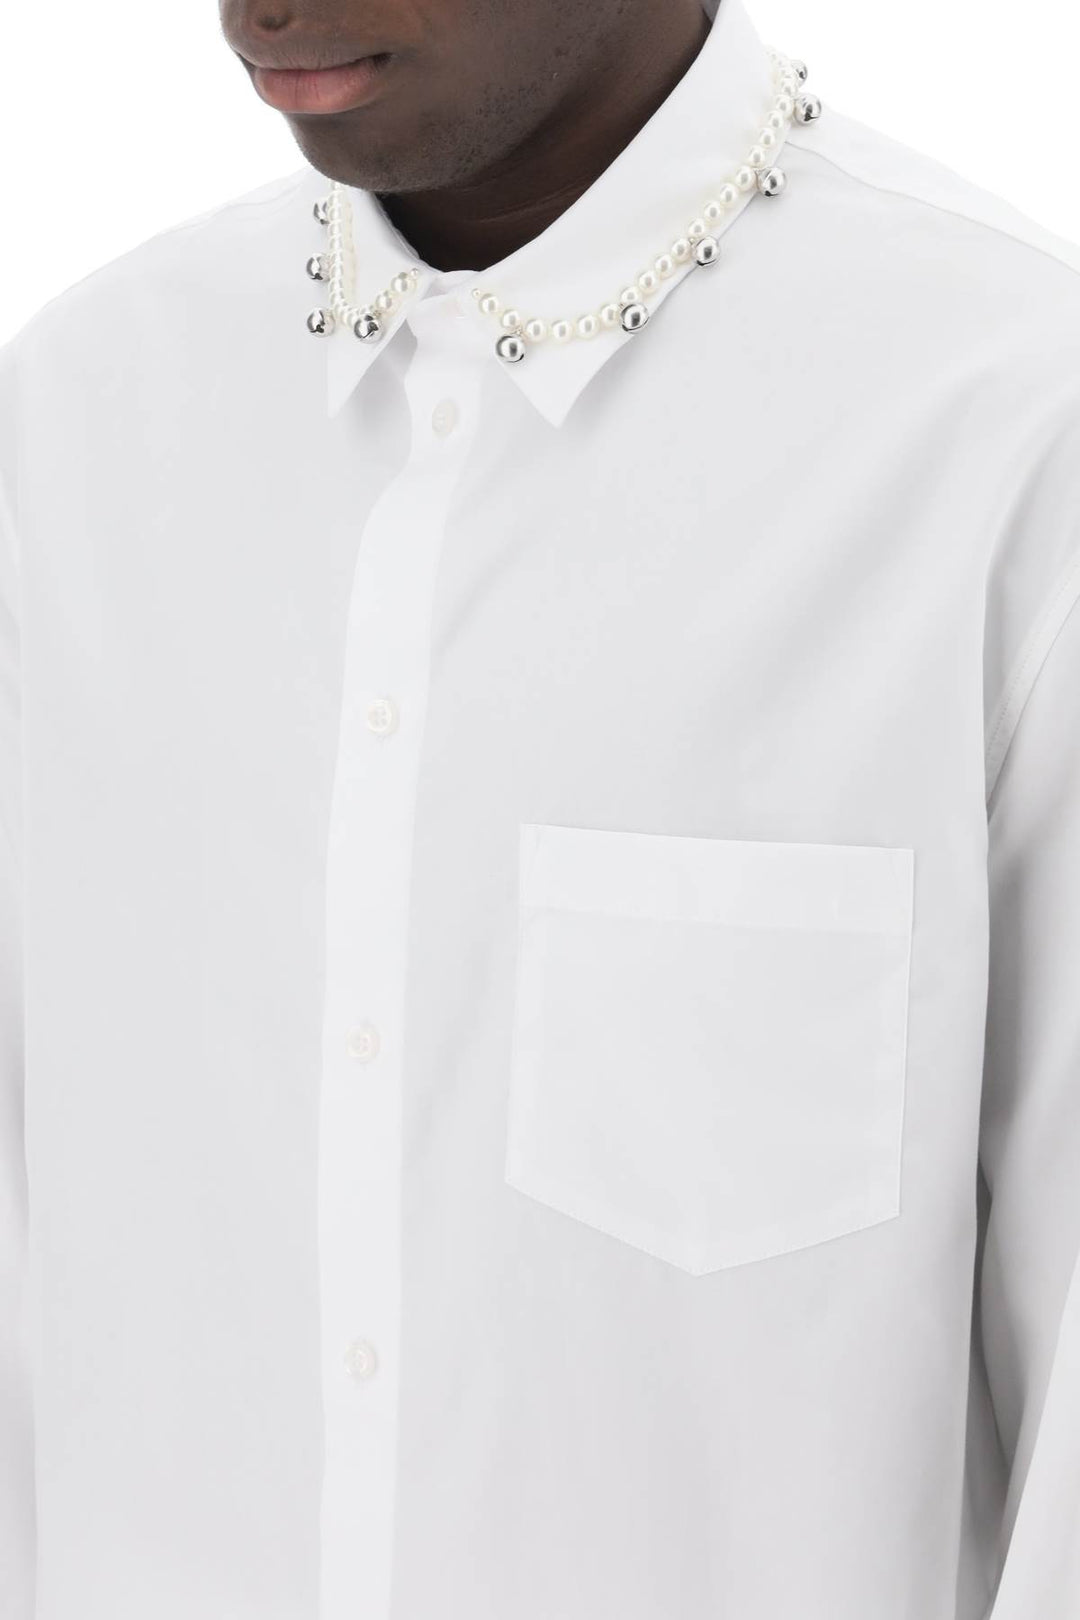 Simone Rocha Shirt With Pearls And Bells   Bianco